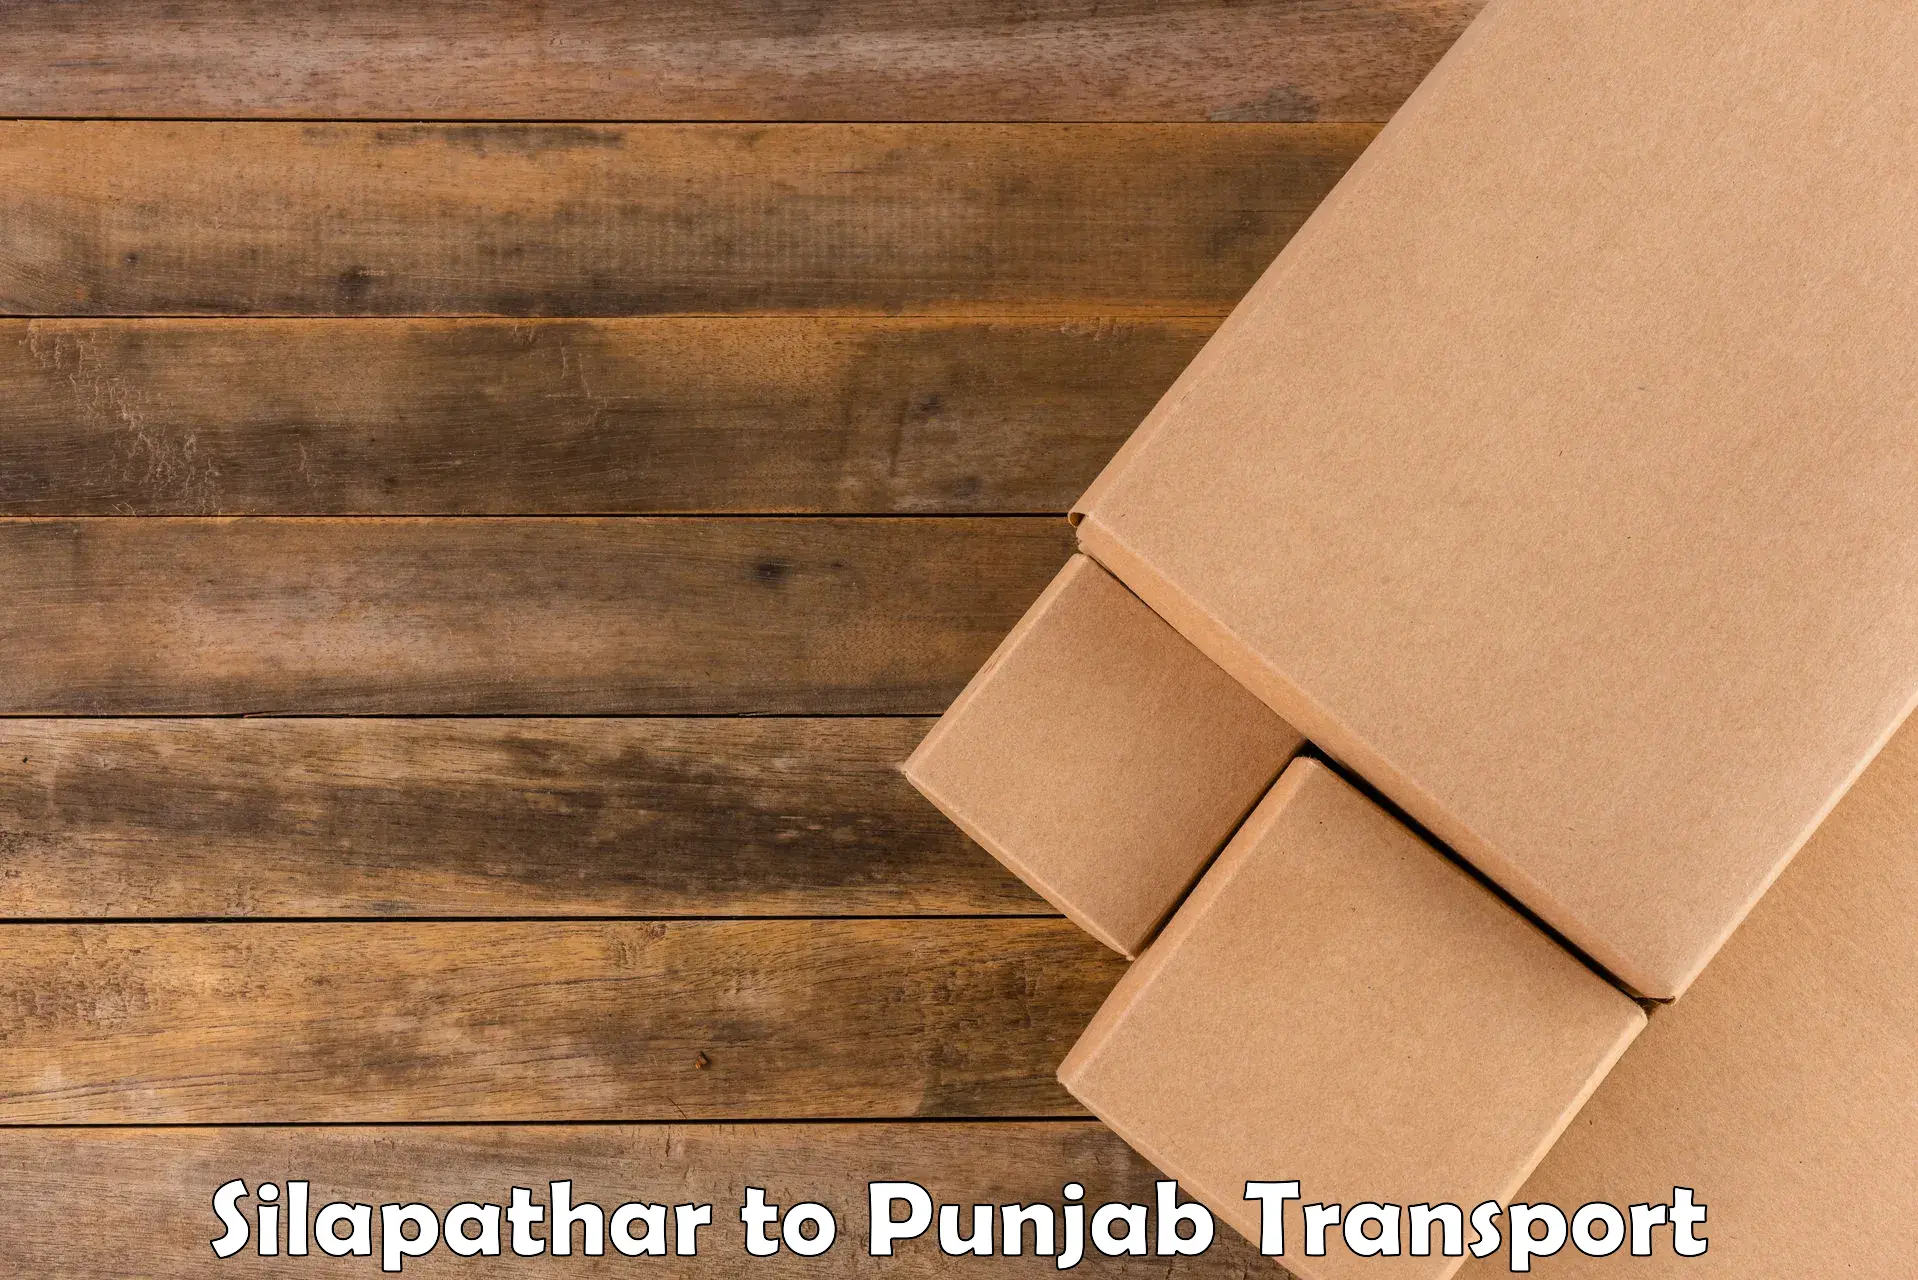 Container transport service Silapathar to Batala